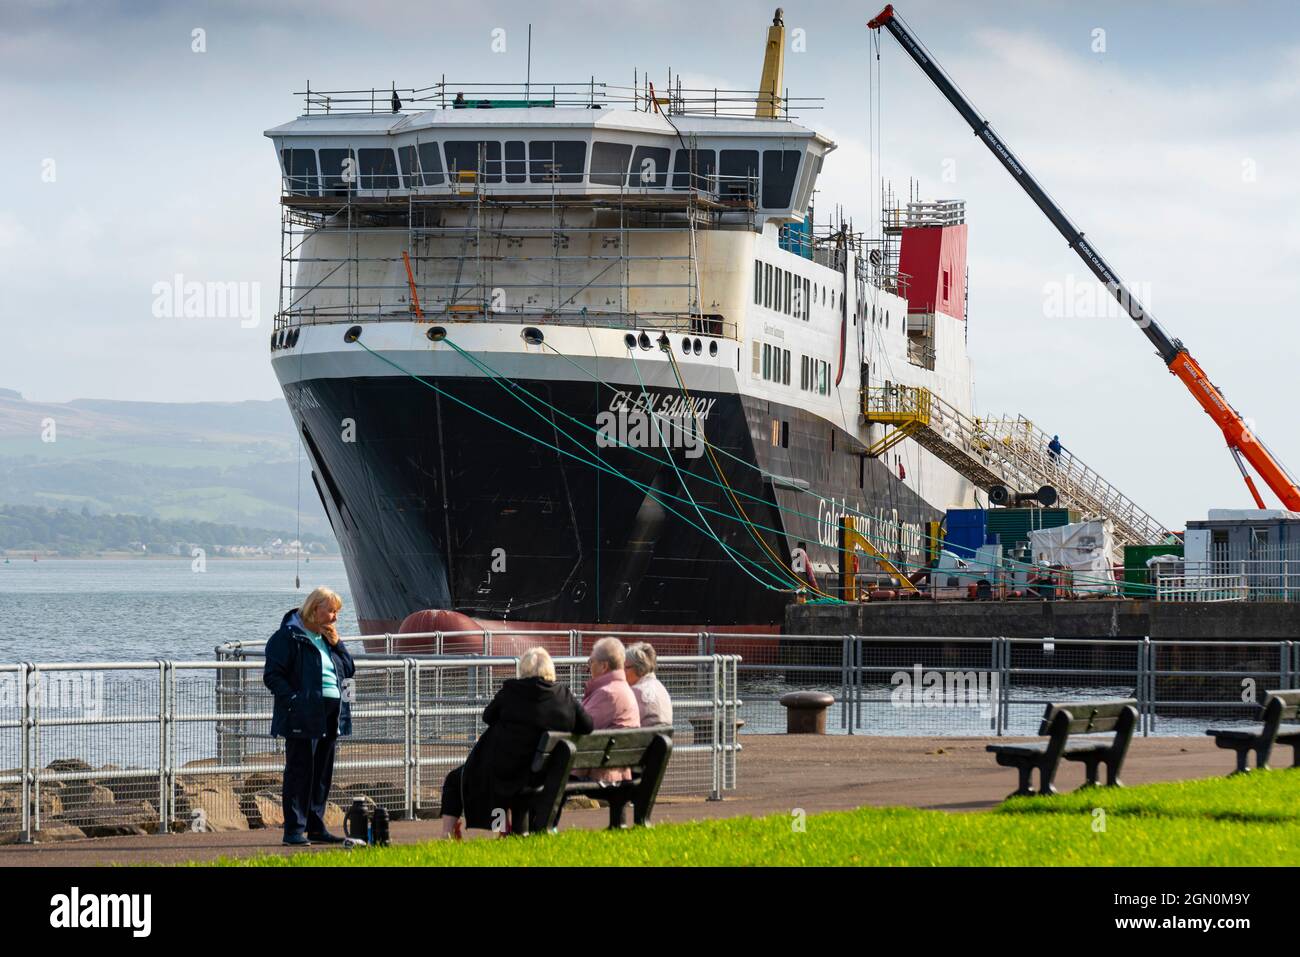 Port Glasgow, Scotland, UK. 21st September 2021, View of controversial Caledonian Macbrayne ferry under fabrication at Ferguson Marine shipyard on lower River Clyde at Port Glasgow, Inverclyde. Iain Masterton/Alamy Live News Stock Photo